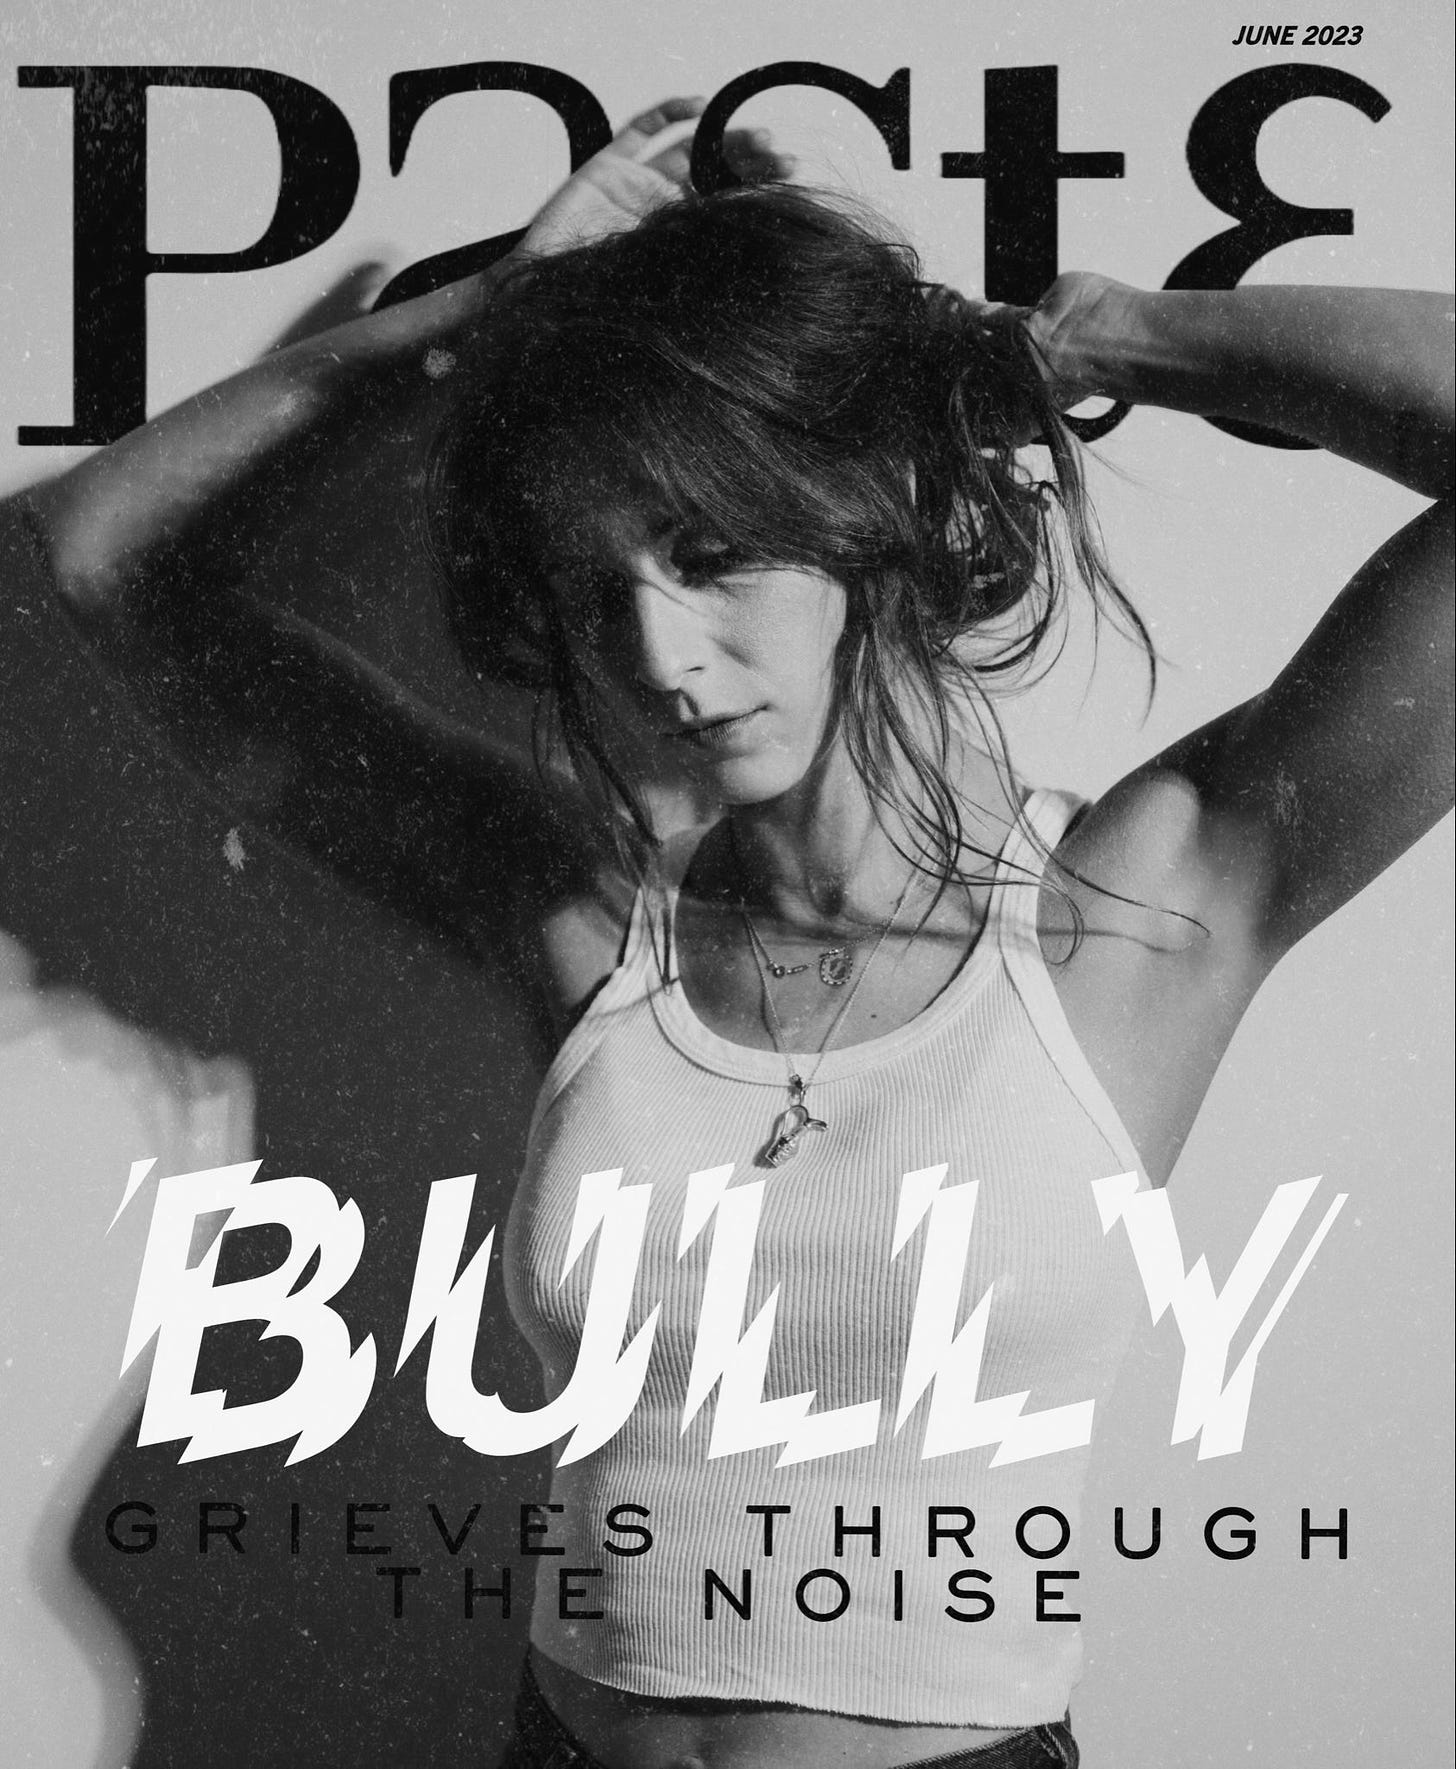 Paste Magazine cover featuring Alicia Bognanno of Bully. Text says “Bully Grieves Through the Noise”